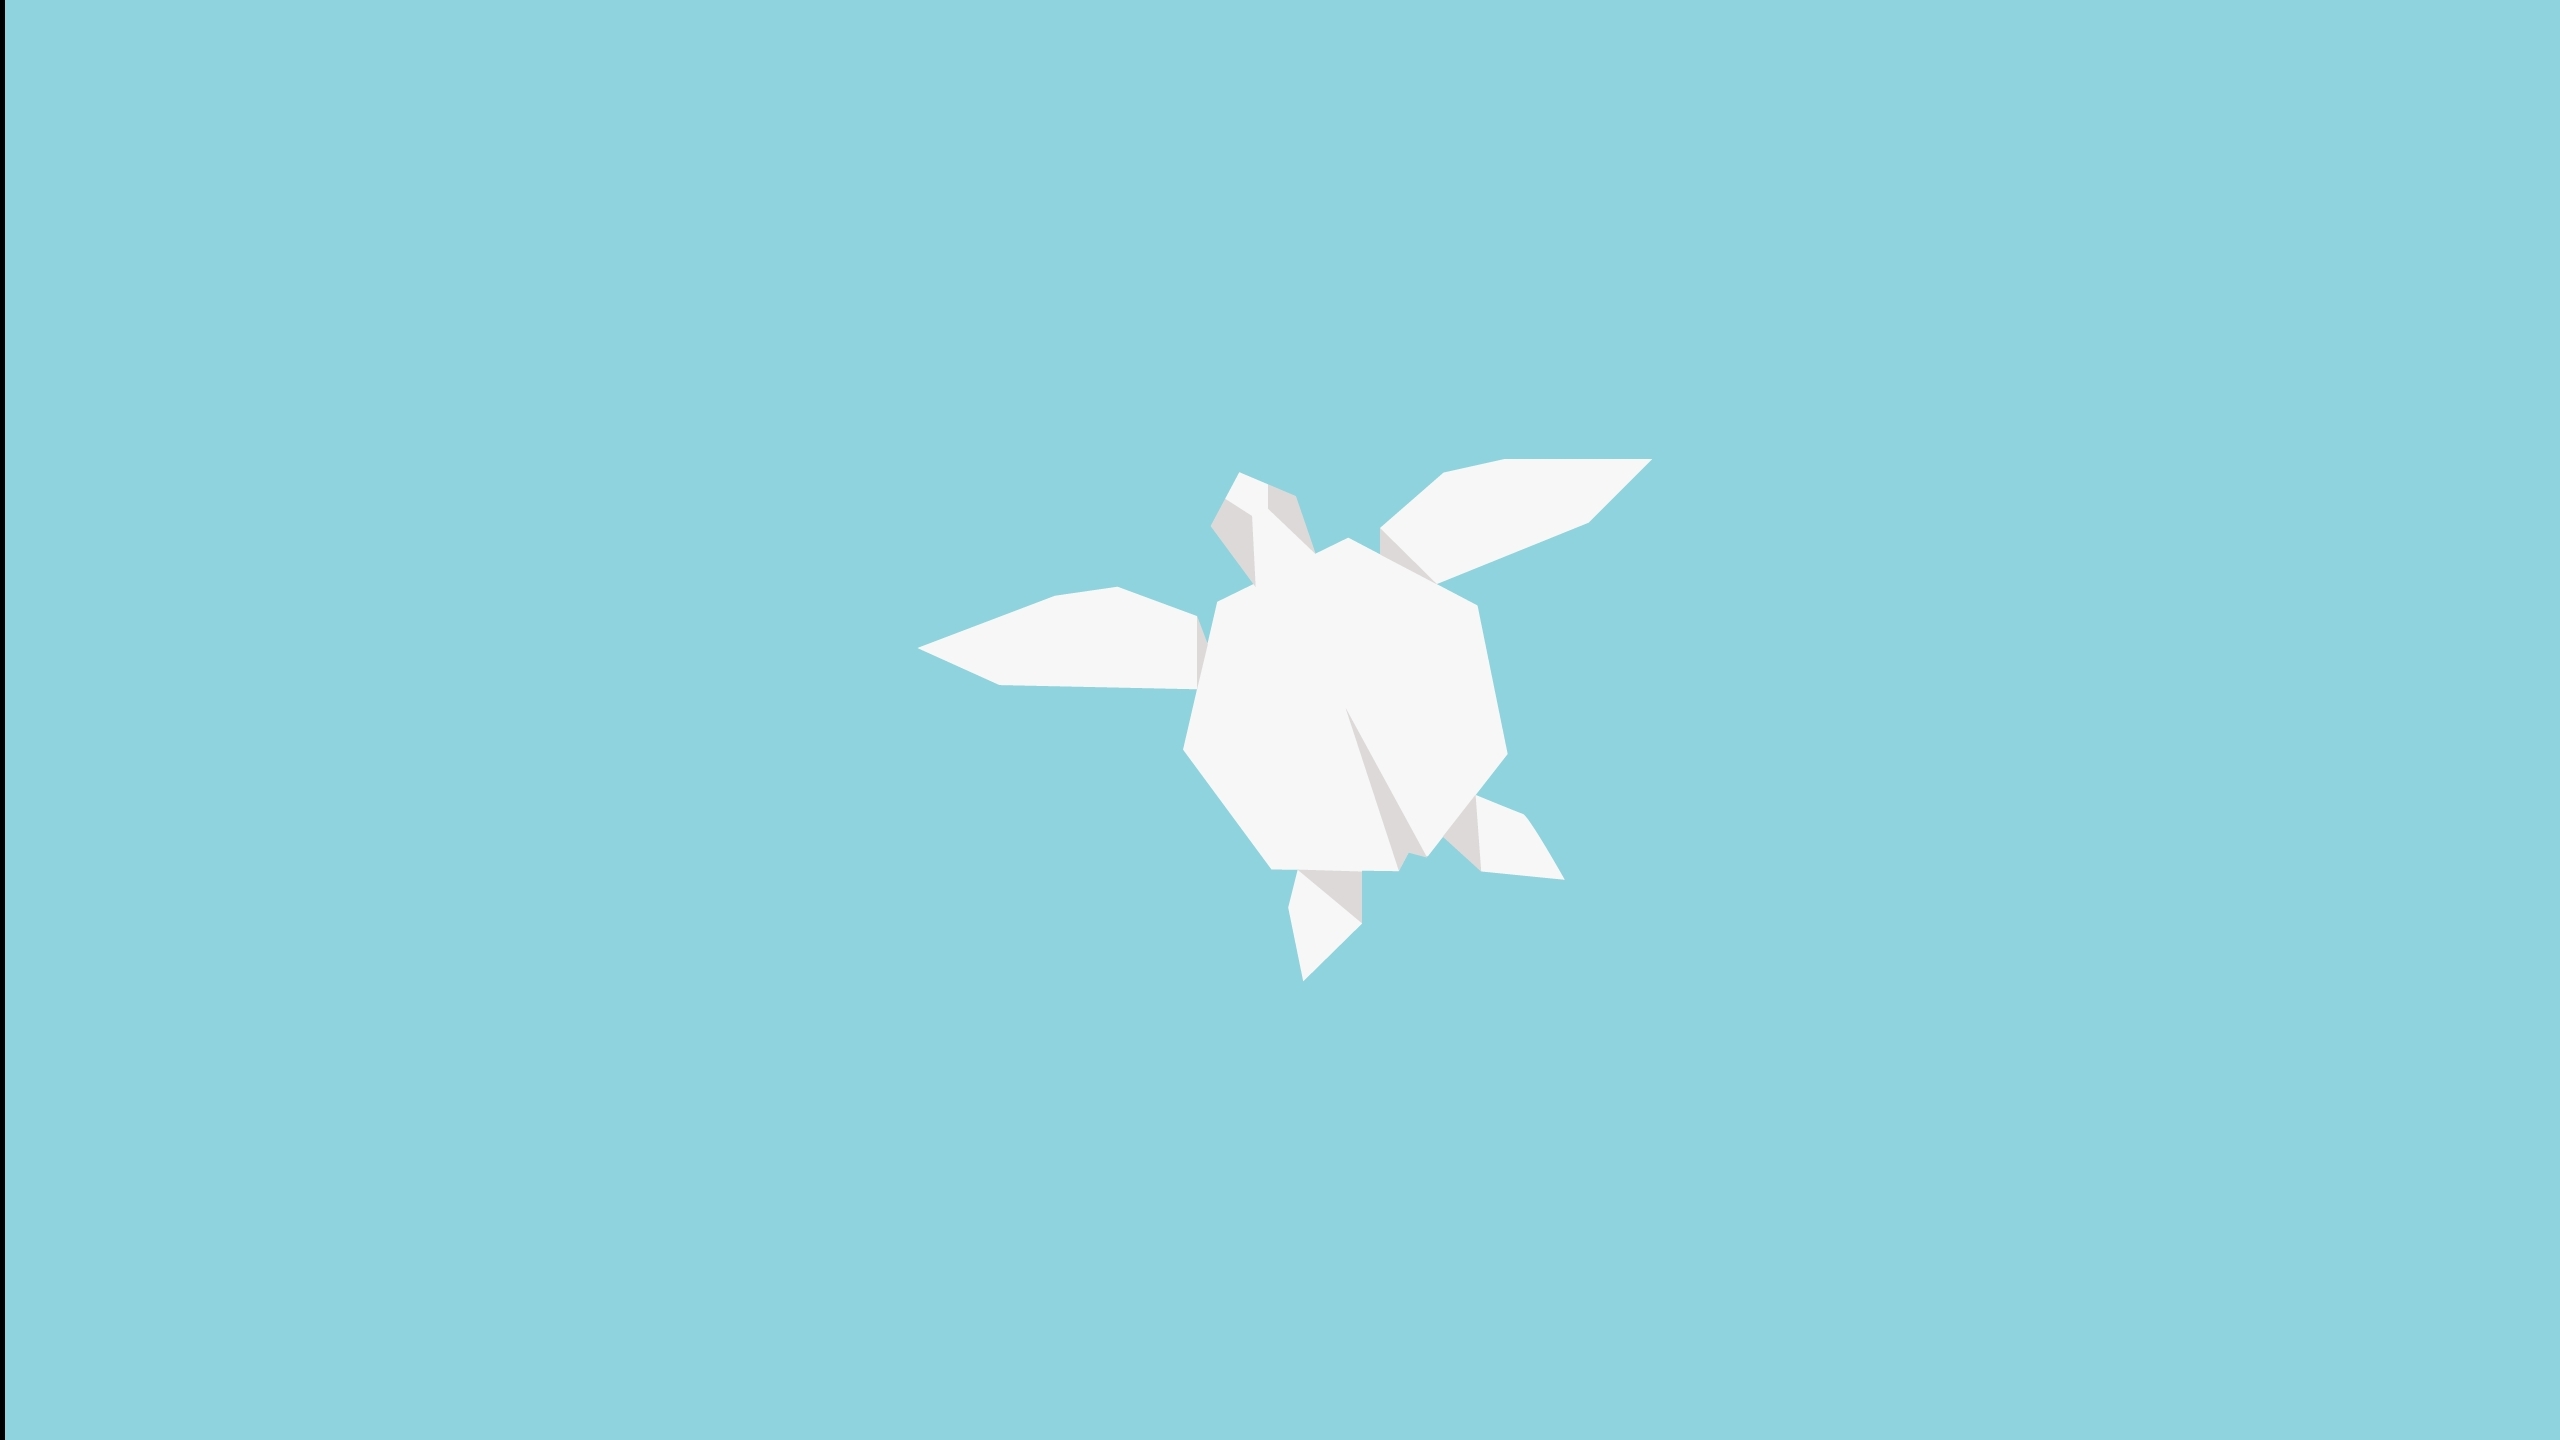 A white turtle on a blue background - Turtle